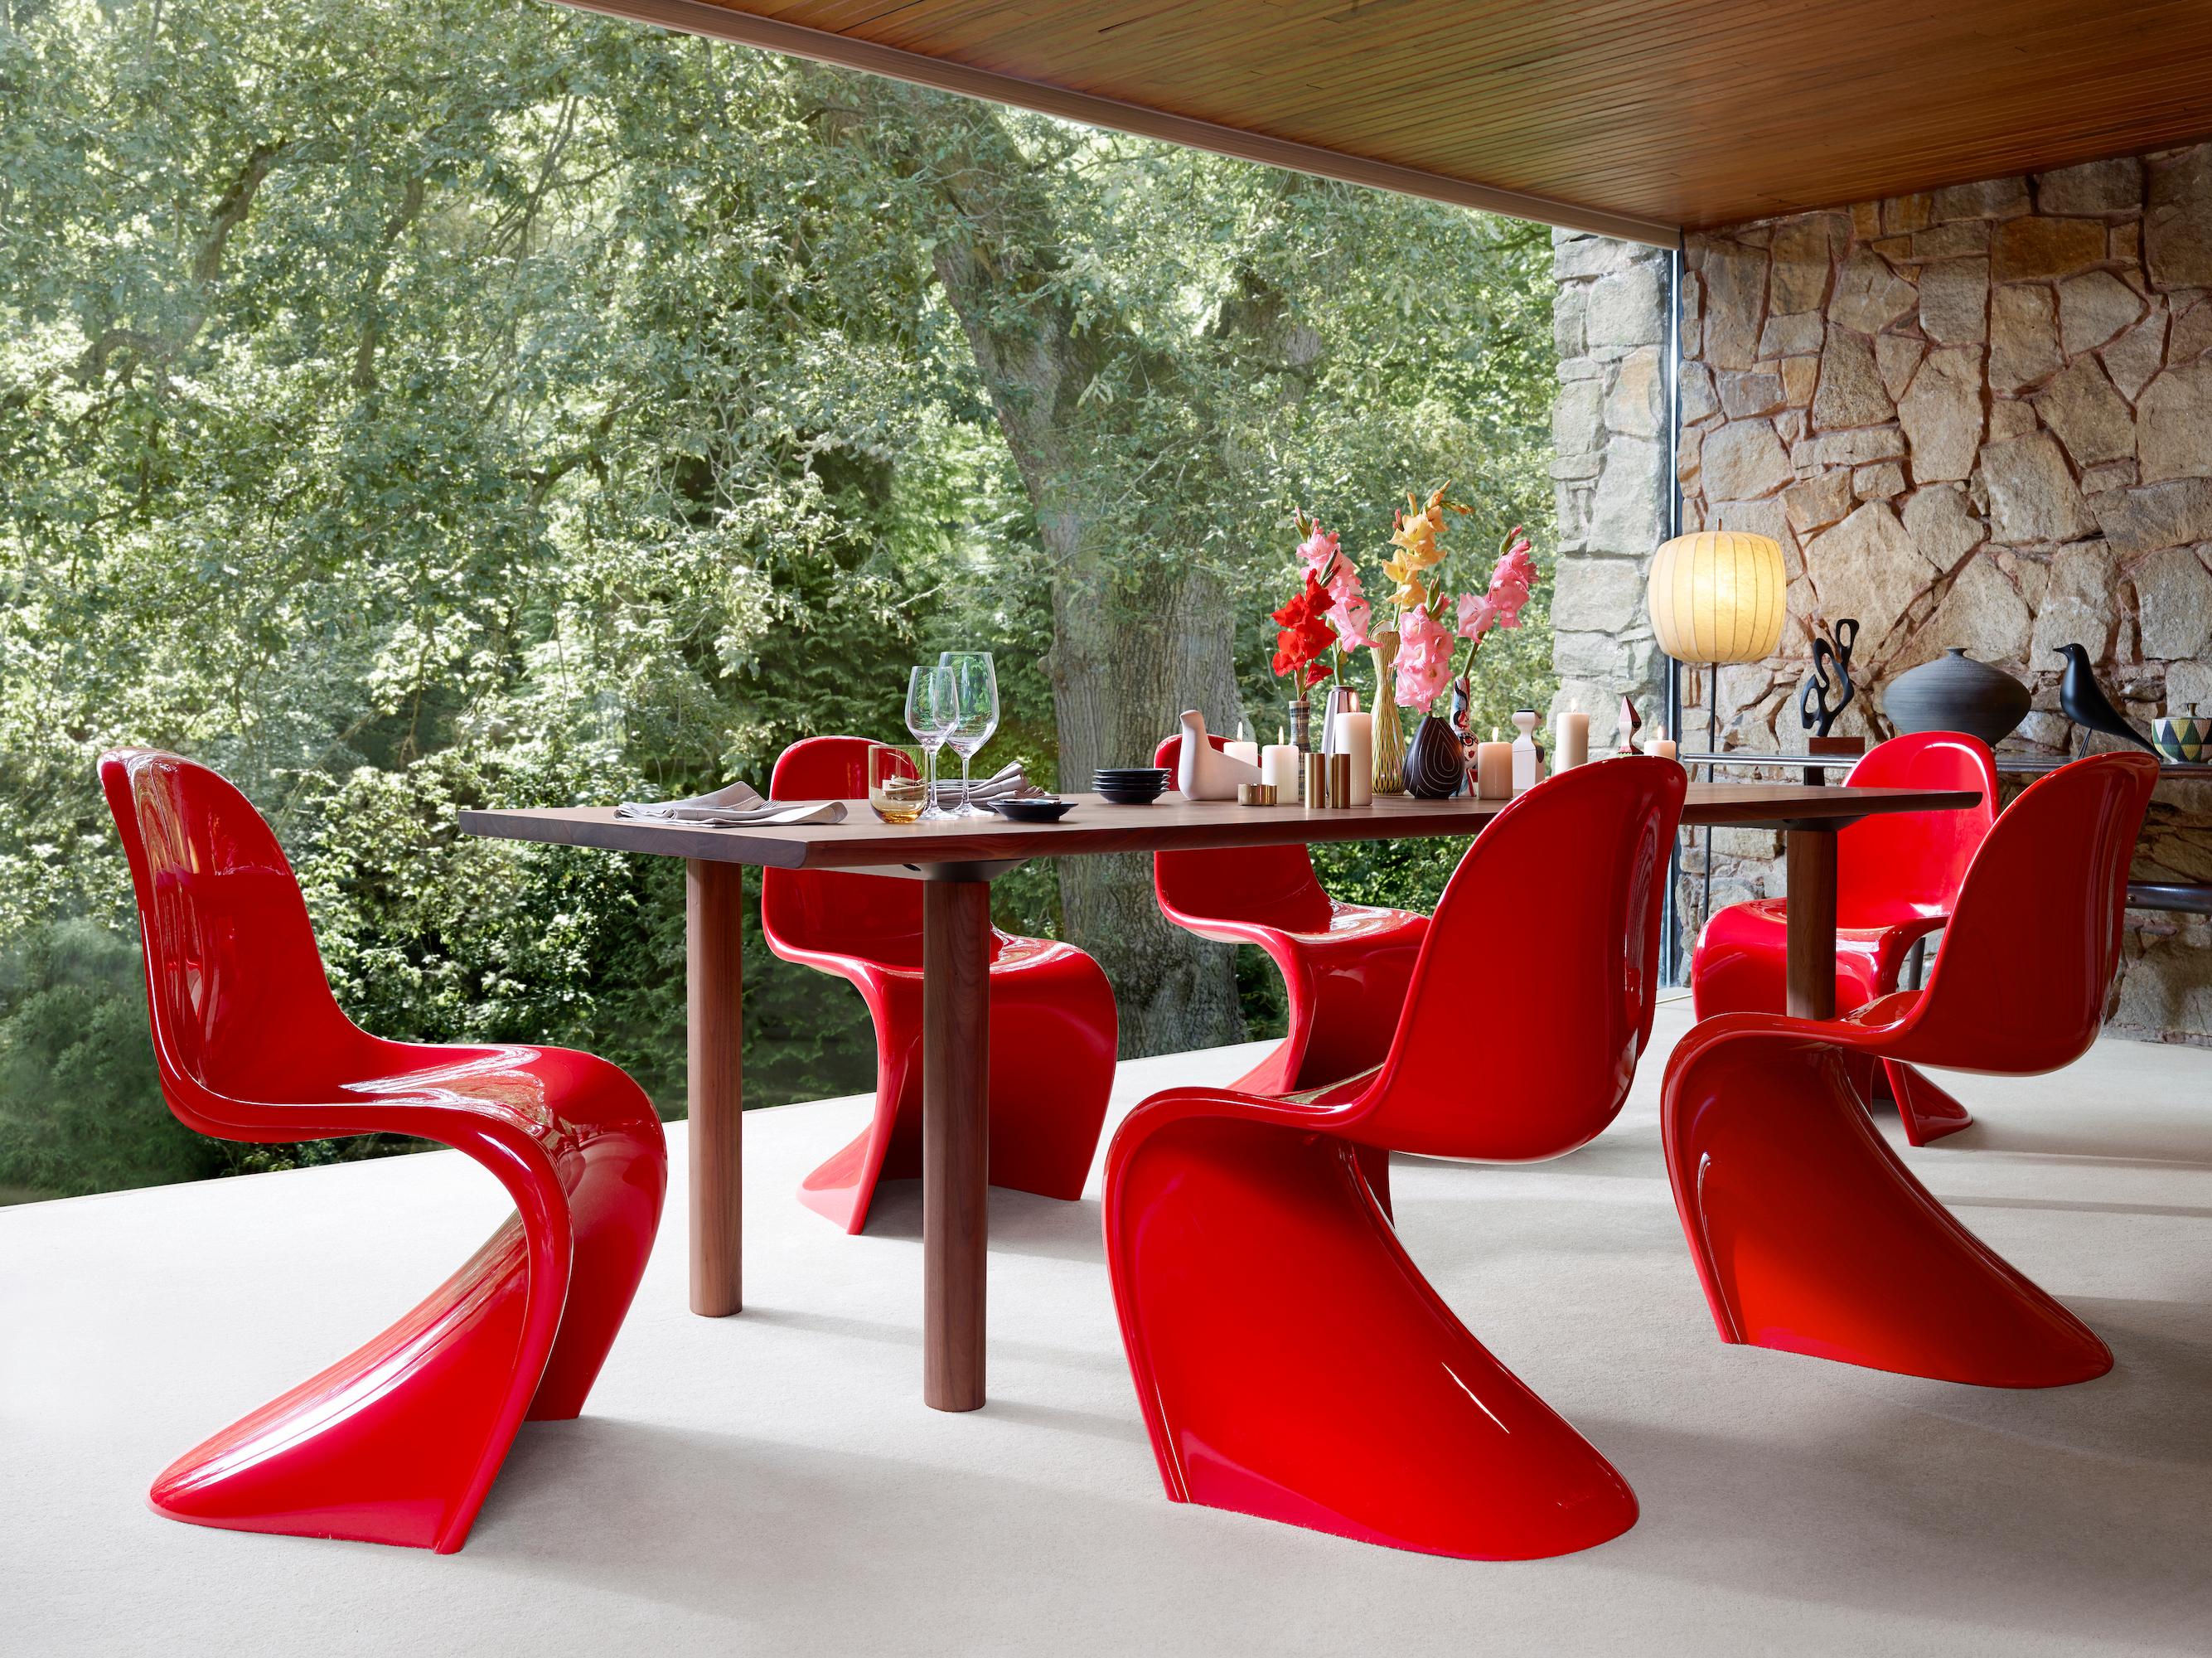 Vitra Classic Panton Chair in Lacquered Red by Verner Panton In New Condition For Sale In New York, NY